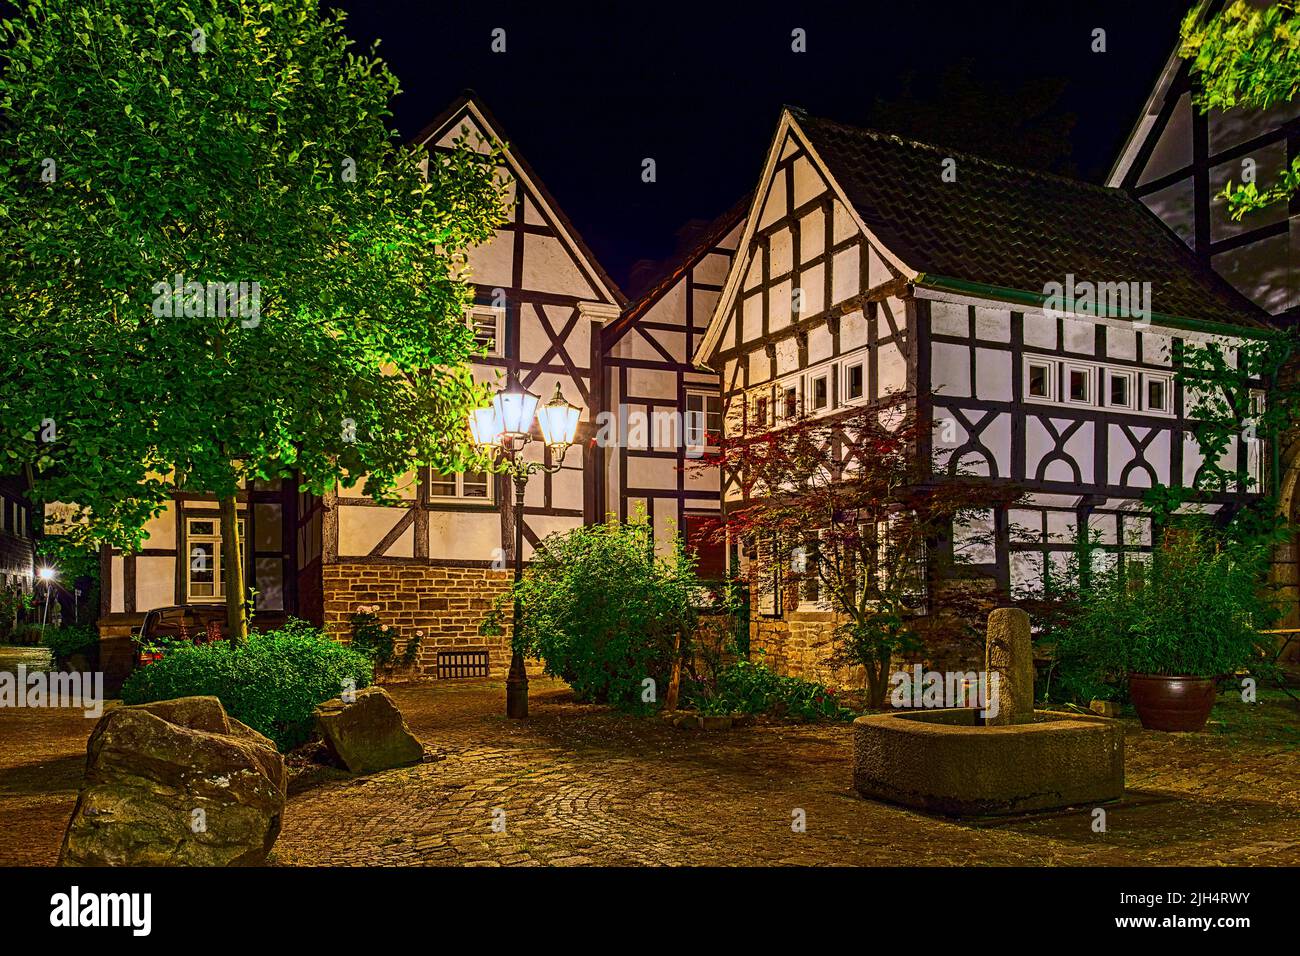 Timber-framed houses Fuenf-Giebel-Eck at the old town of Wetter, HDR, Germany, North Rhine-Westphalia, Ruhr Area, Wetter/Ruhr Stock Photo